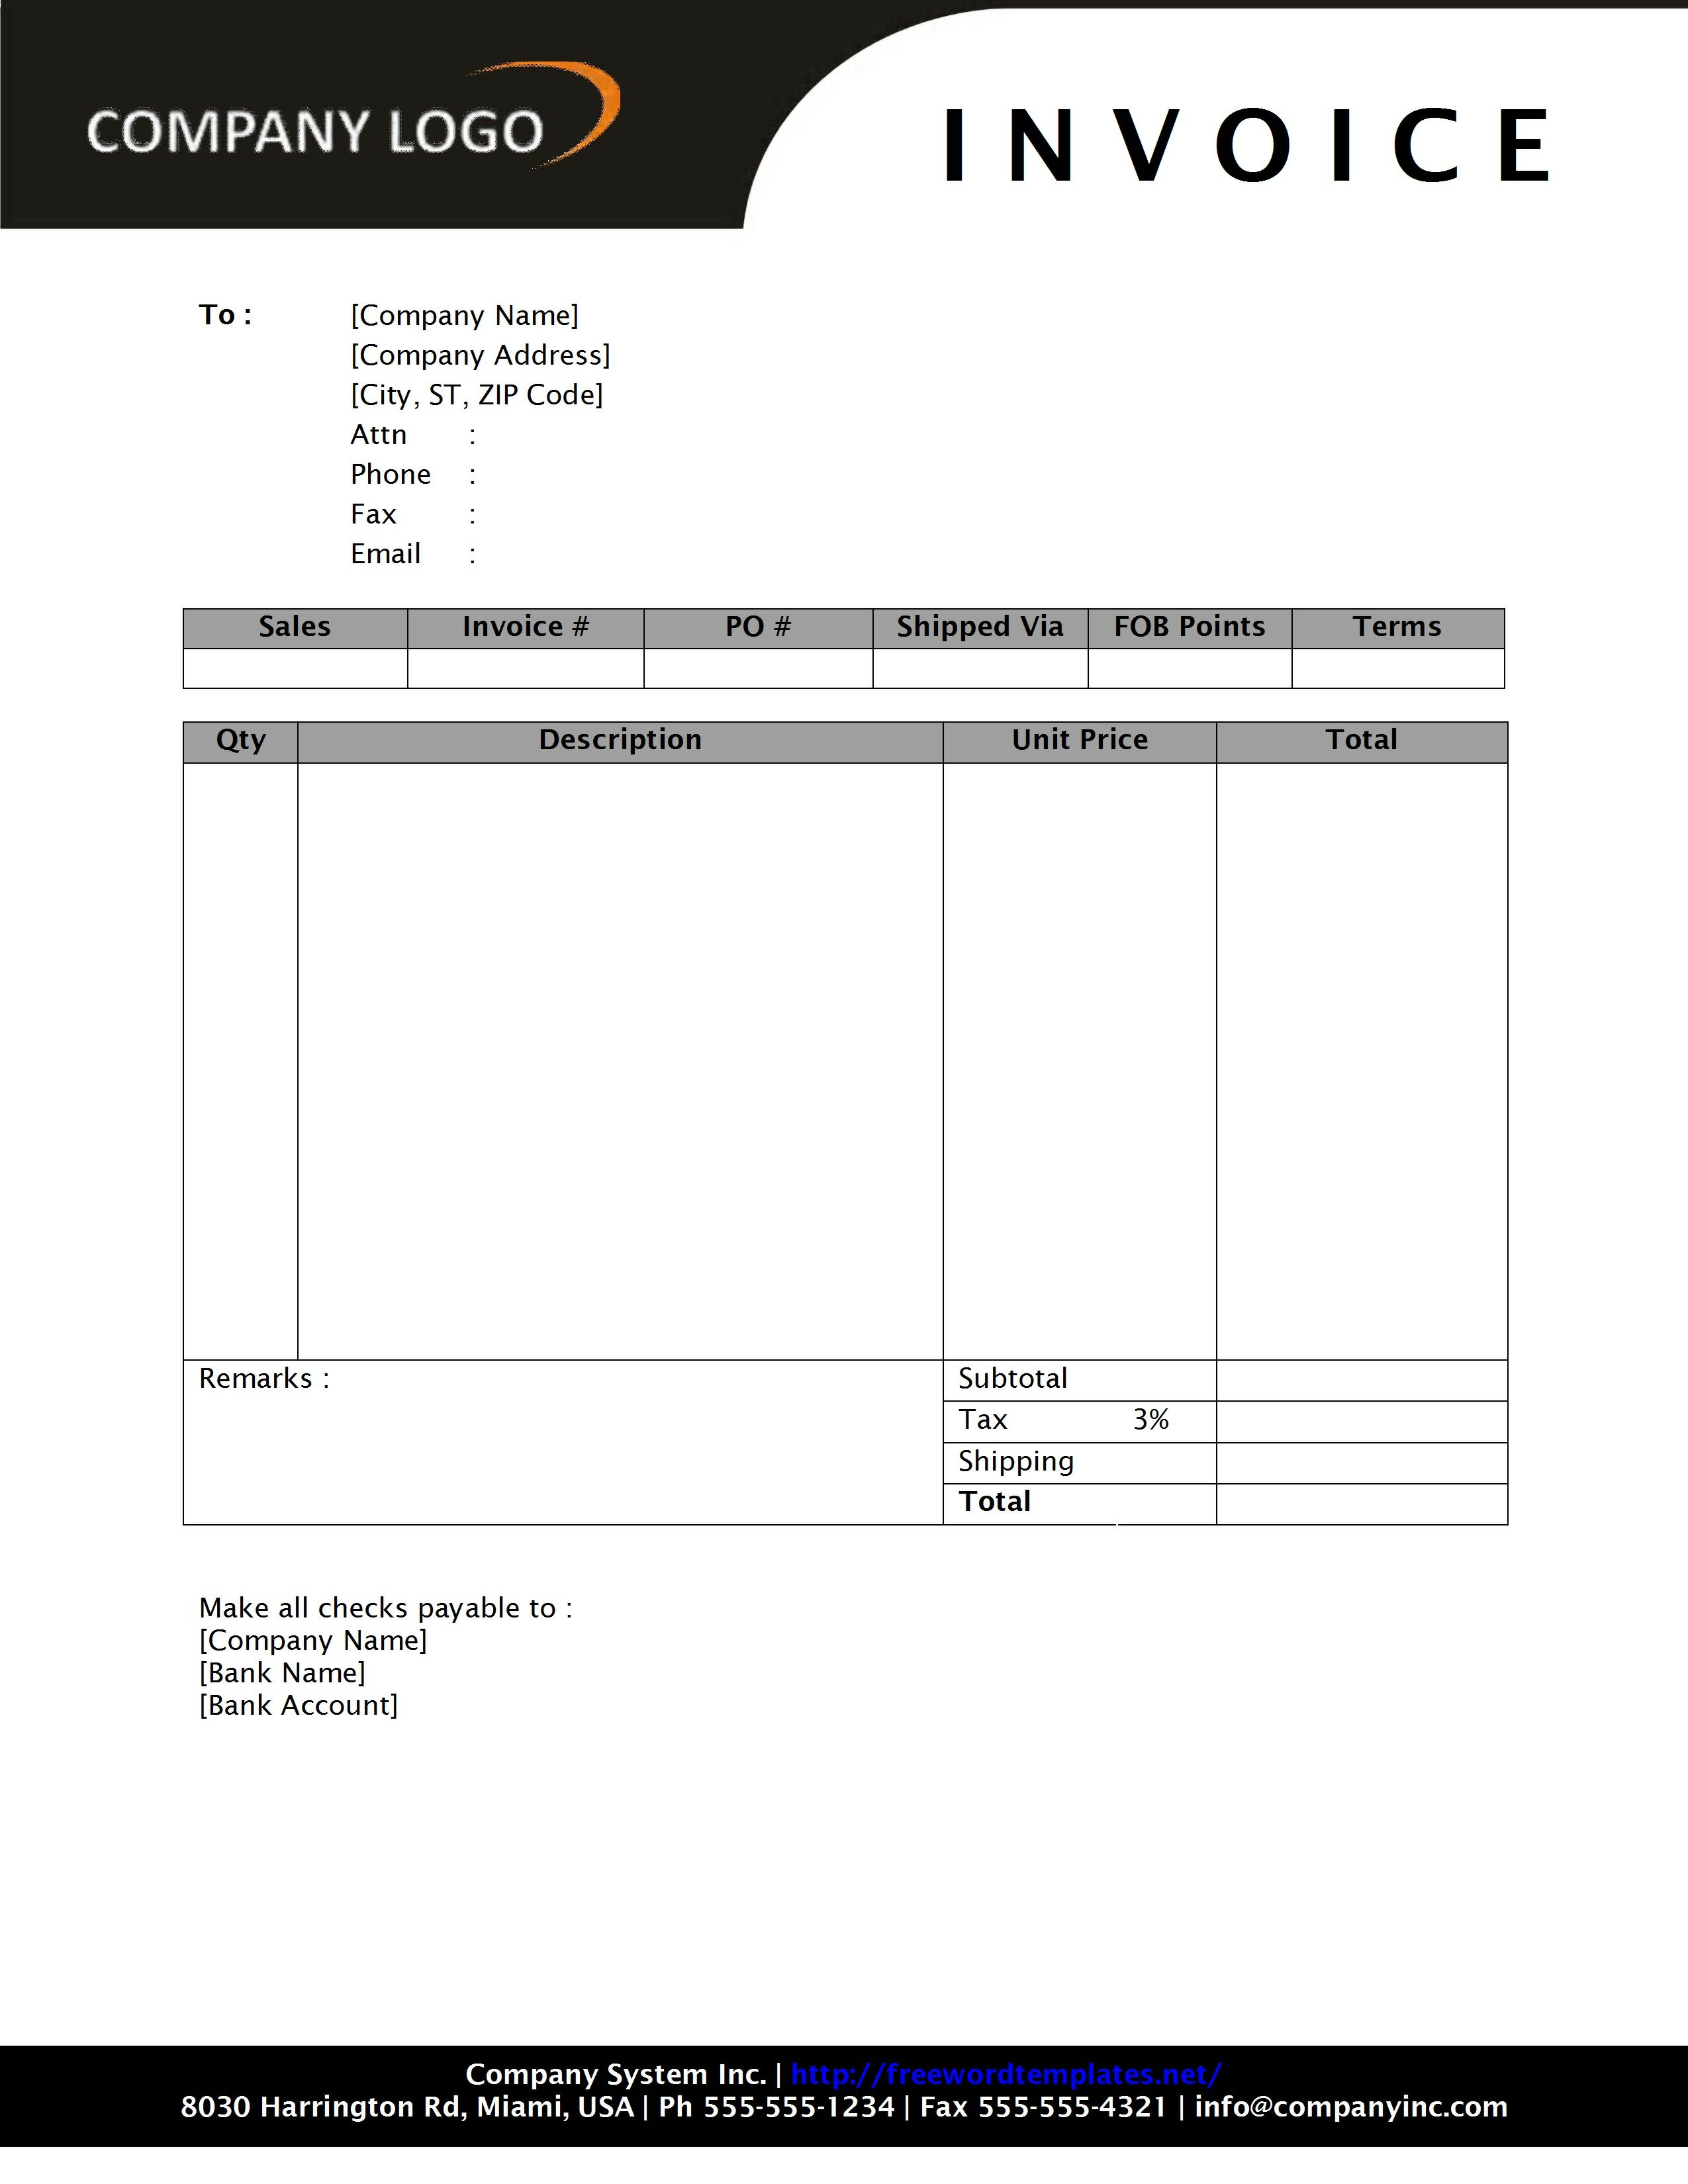 Sales Invoice with SD1 Style Letterhead